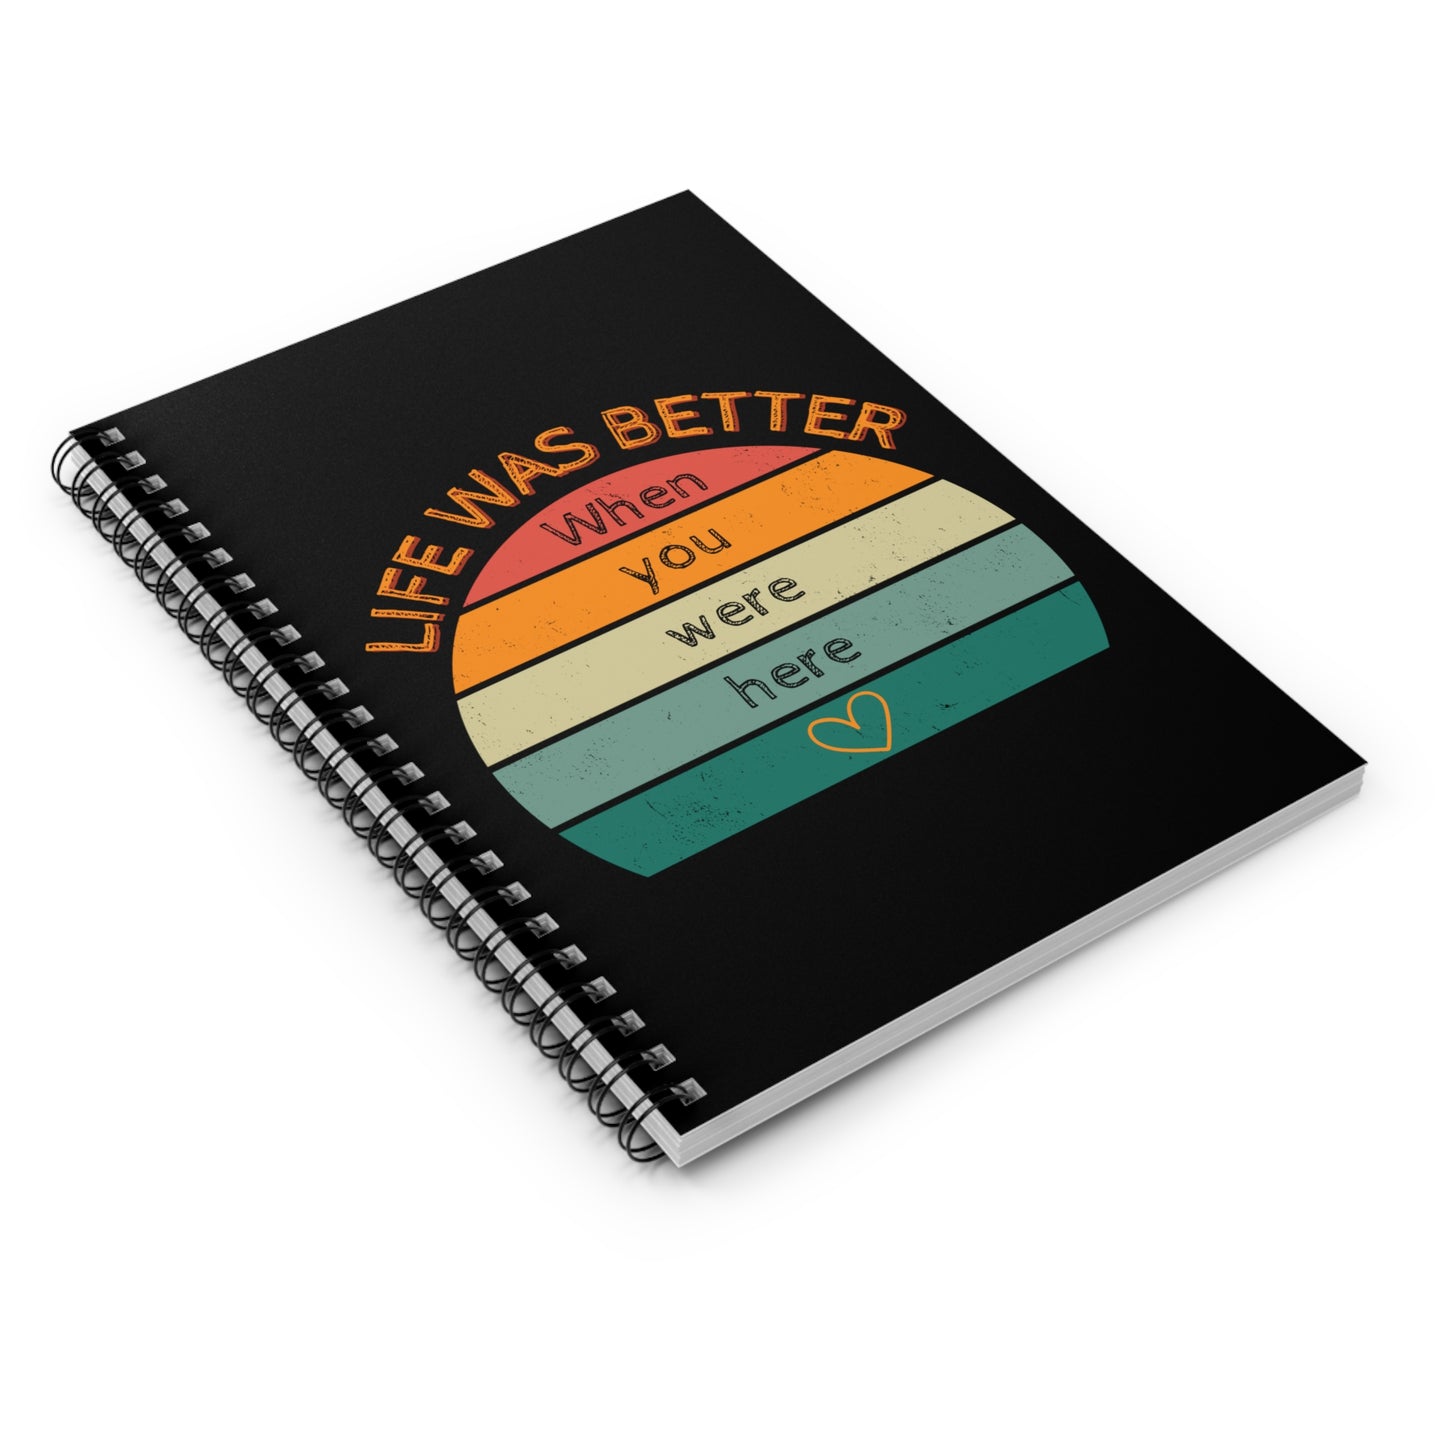  Journaling about your grief journey can be cathartic and healing; and this spiral notebook with a gentle cover design about grief, provides the perfect space to record your thoughts and emotions.